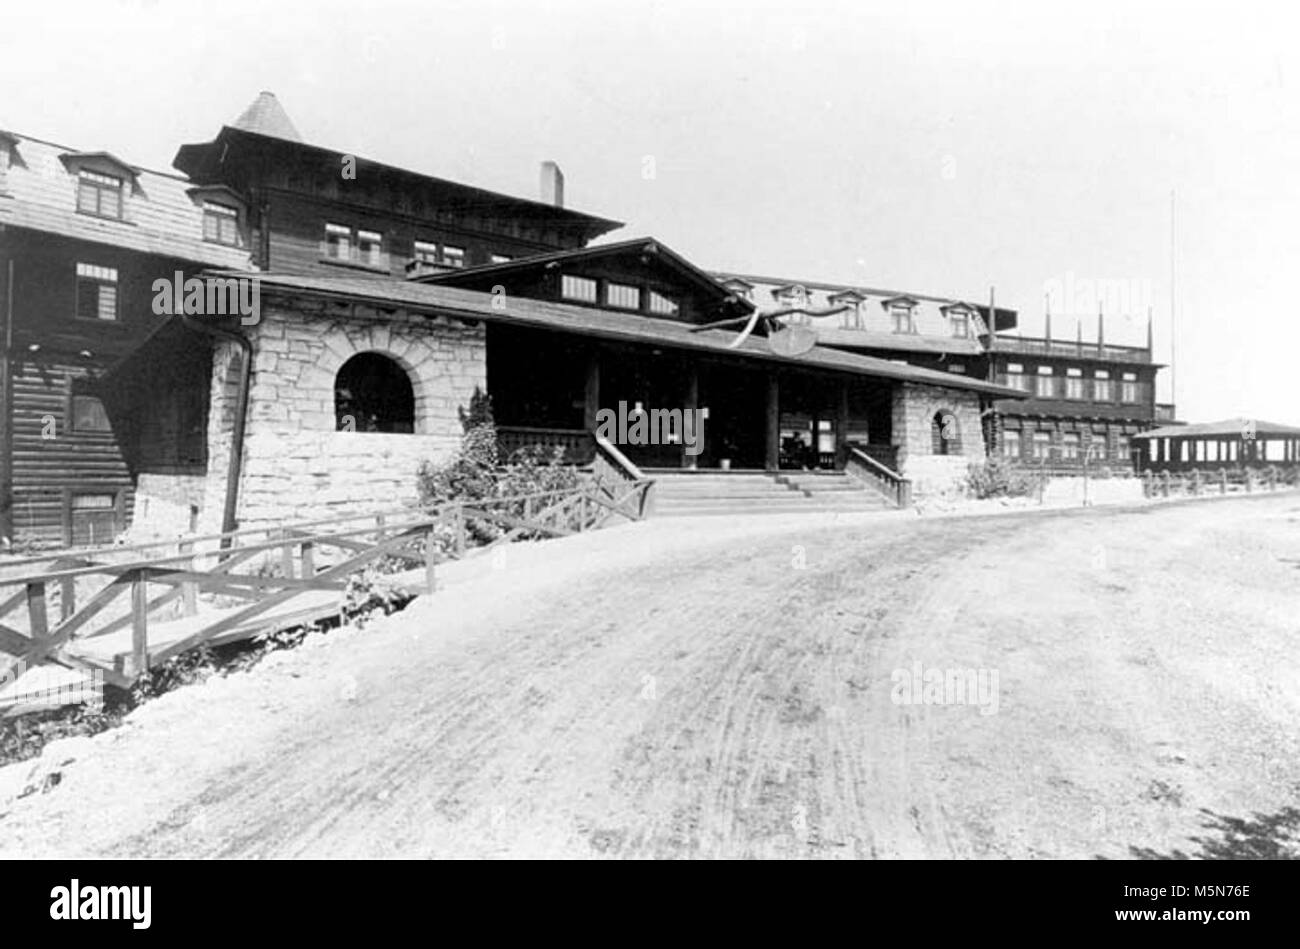 Grand Canyon Historic El Tovar Hotel . EL TOVAR HOTEL FRONT ENTRANCE, LOW ANGLE.  DIRT DRIVEWAY PROMINENT, WITH WHEEL TRACKS. Stock Photo